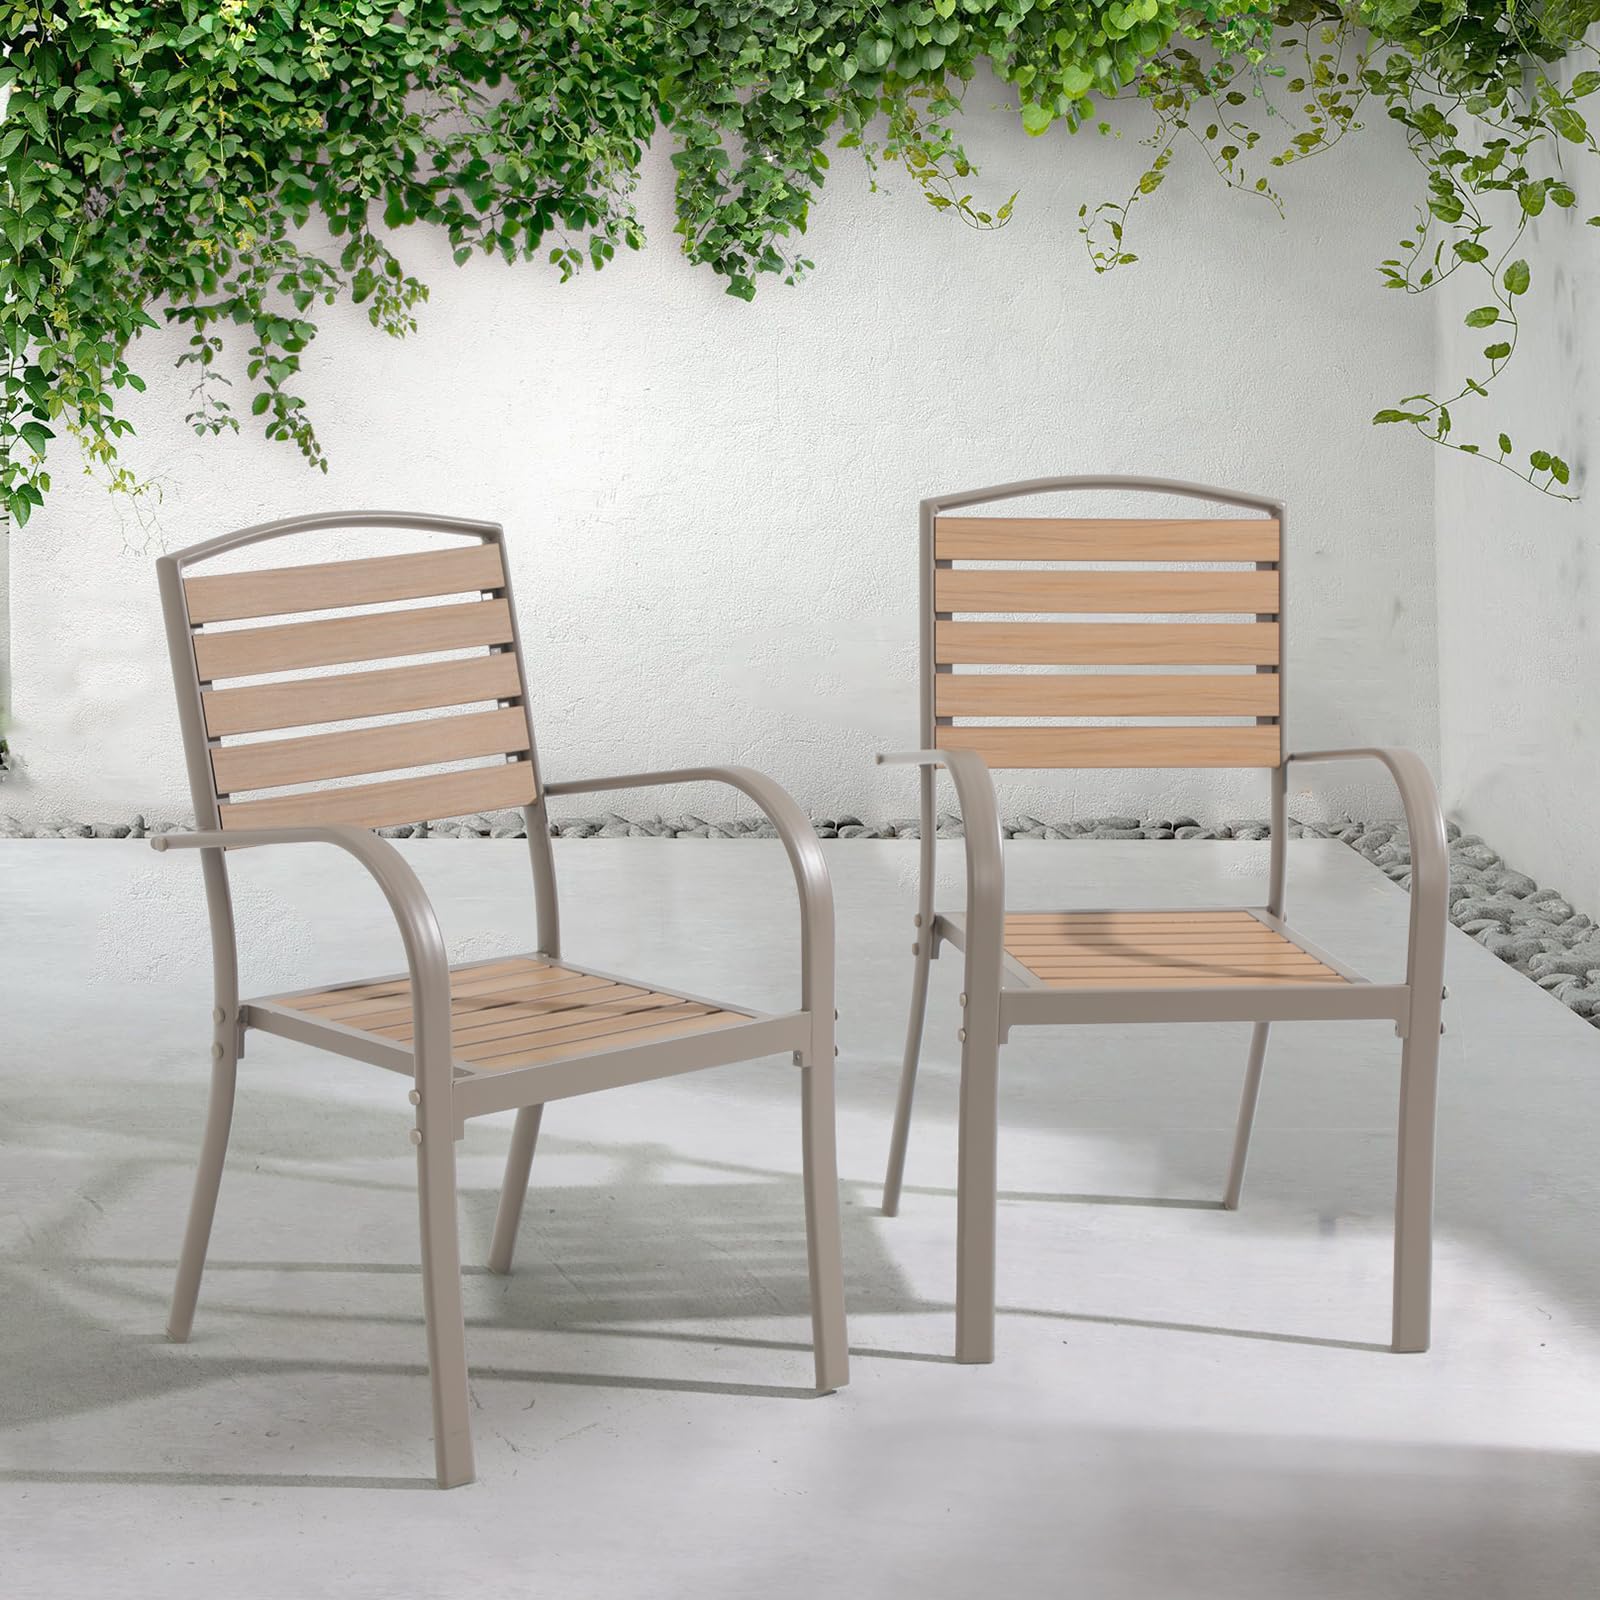 2-6pcs Stackable Patio Chairs, Aluminum Outdoor Dining Chairs, Faux Wood Slat Seat Dining Chair 